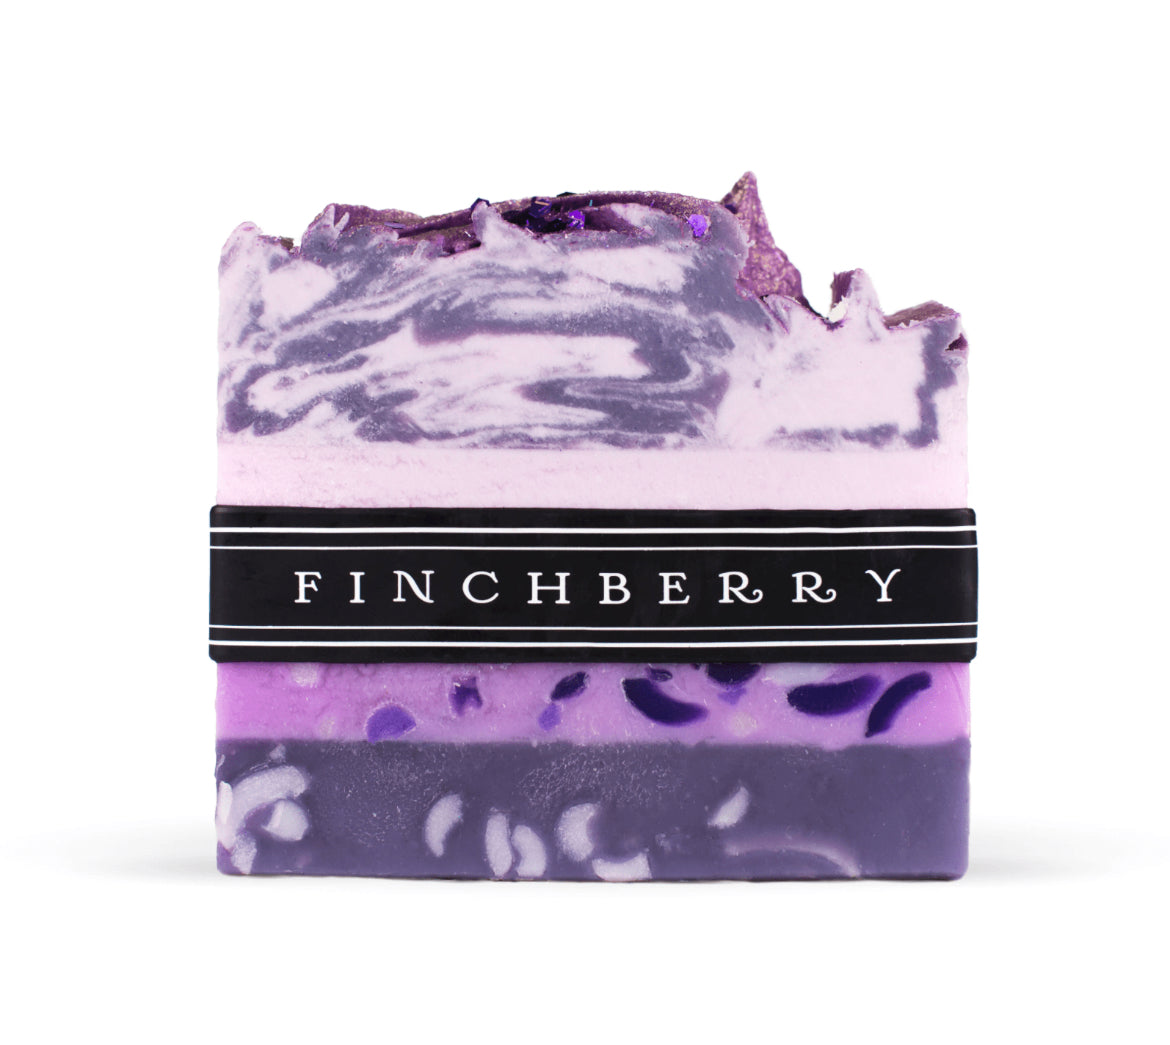 Finchberry | Grapes of Bath Soap